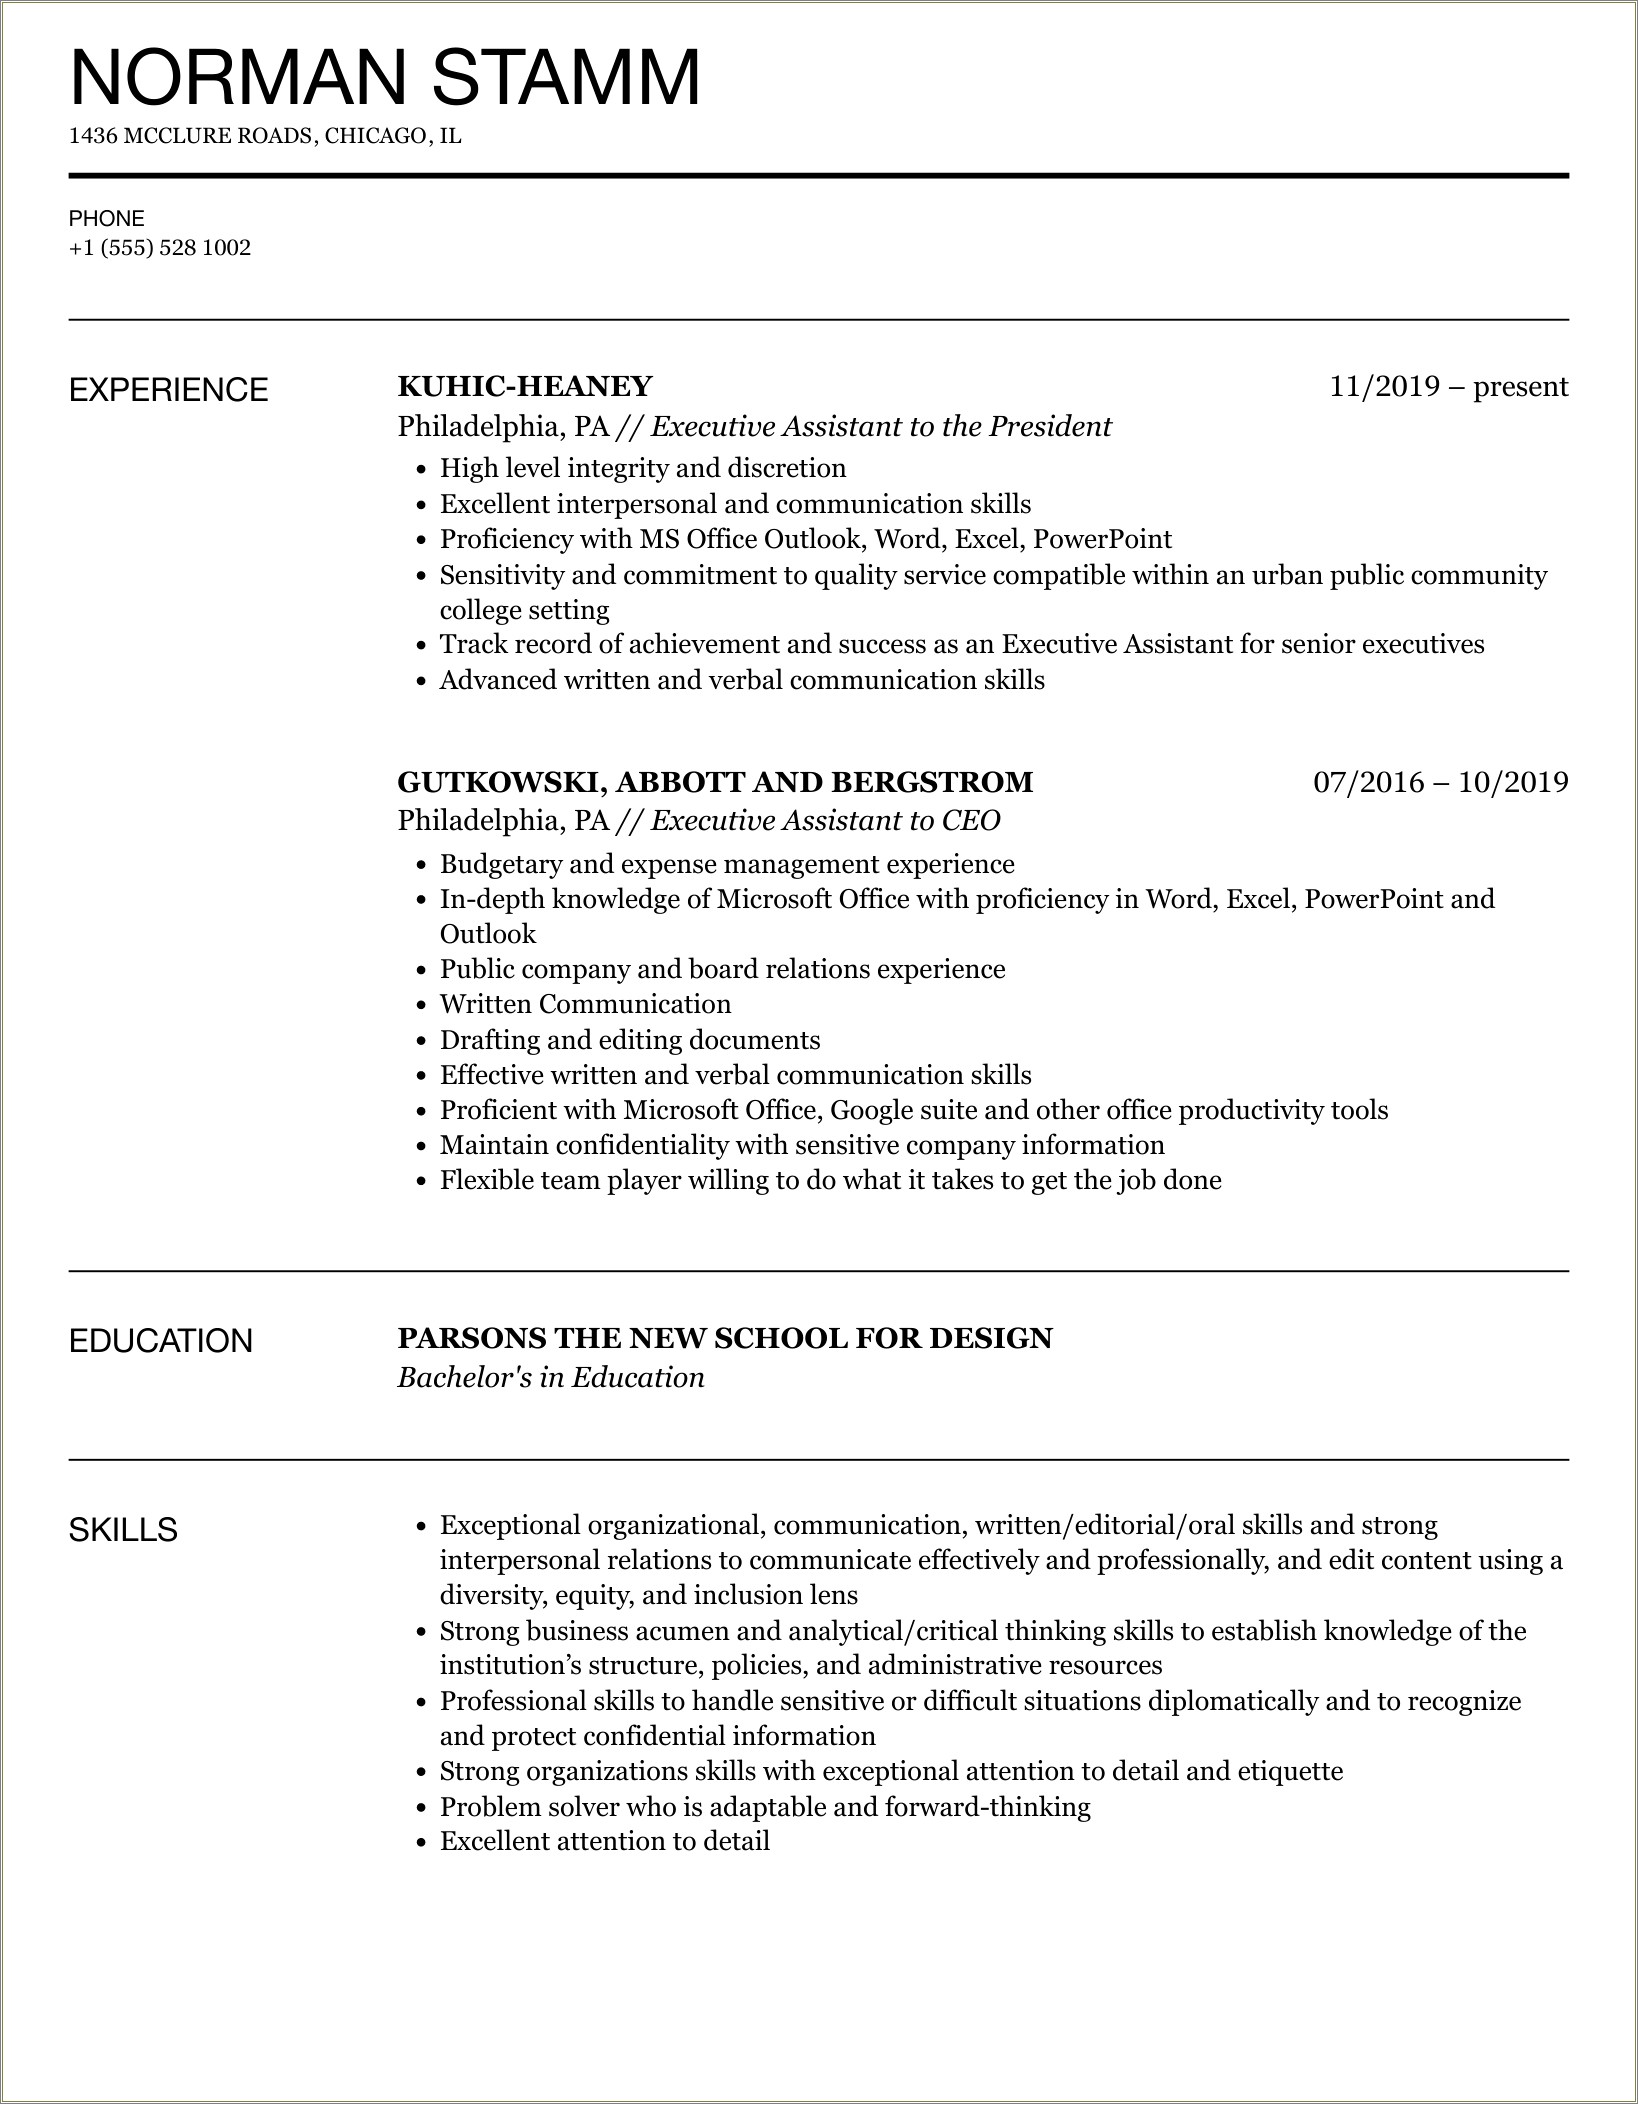 Sample Resume For Executive Assistant With Employment Gap